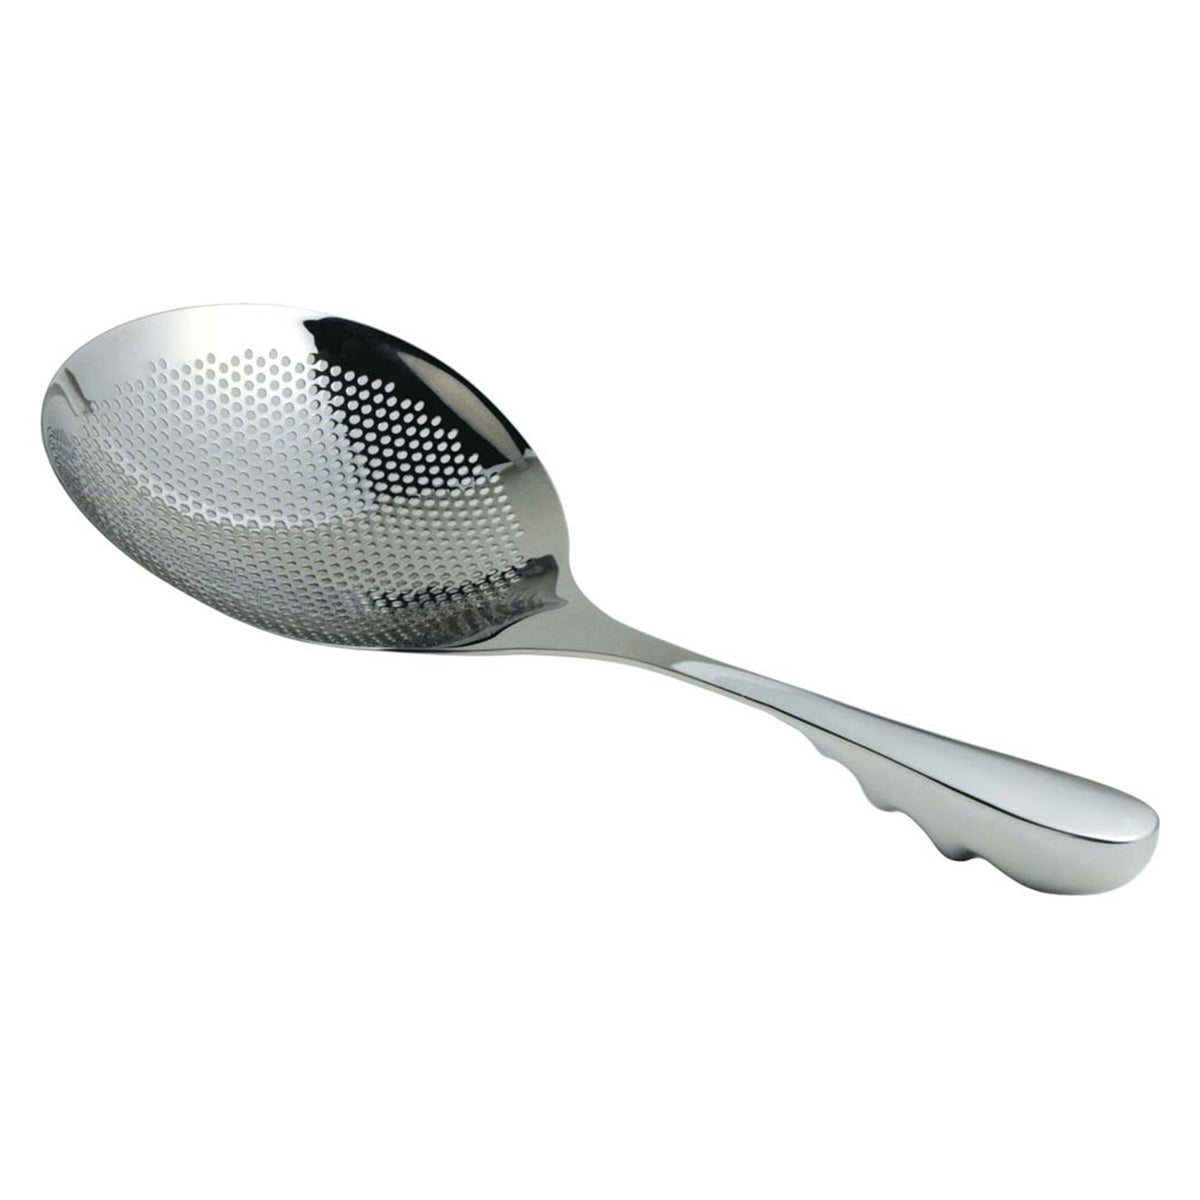 Nonoji Stainless Steel Ladle with Holes